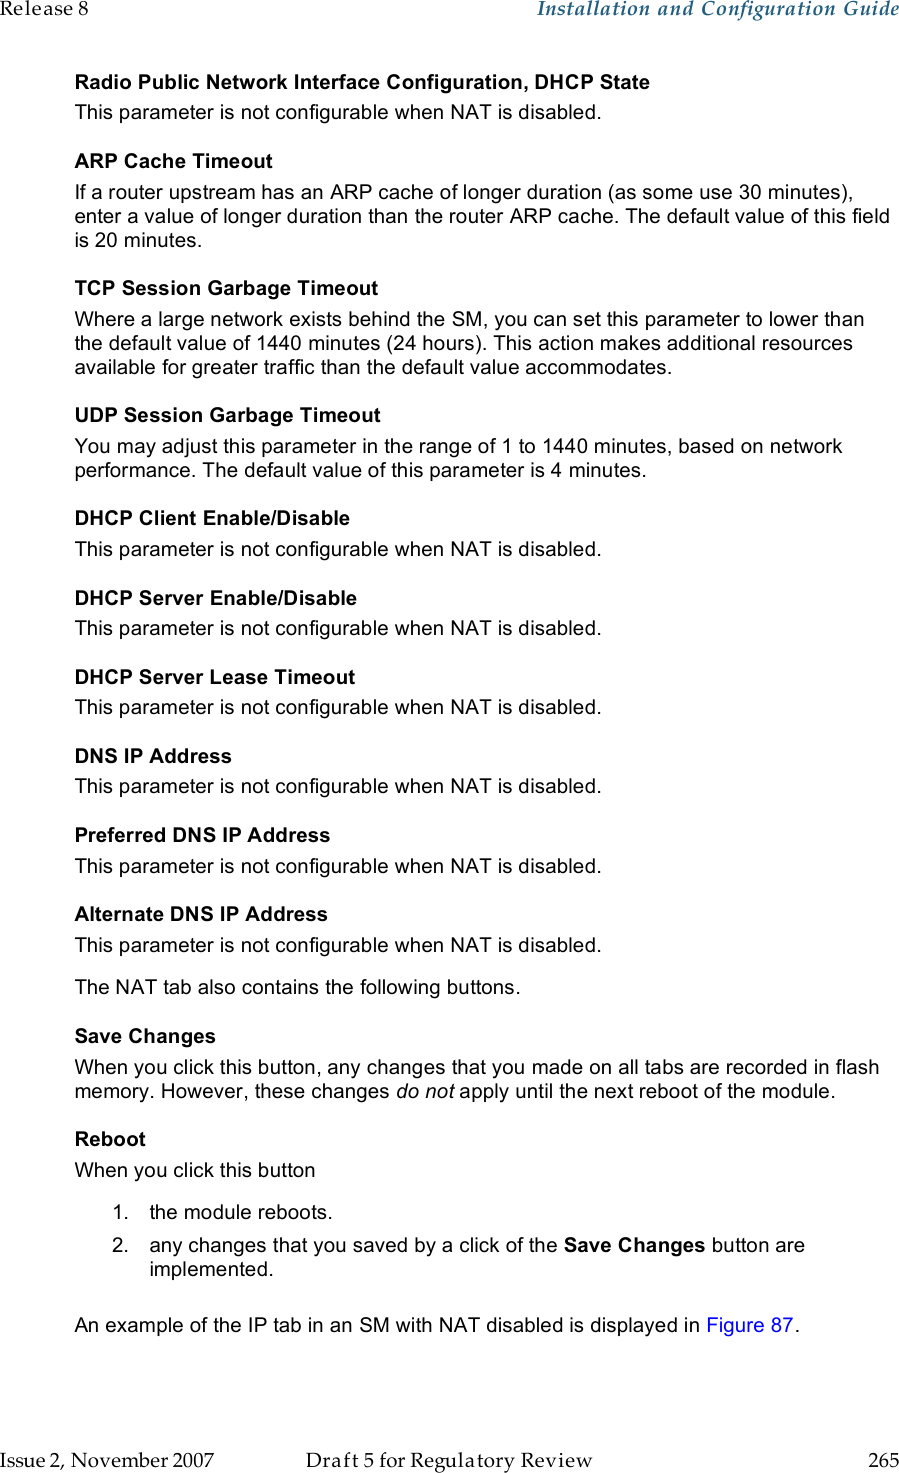 Release 8    Installation and Configuration Guide   Issue 2, November 2007  Draft 5 for Regulatory Review  265     Radio Public Network Interface Configuration, DHCP State This parameter is not configurable when NAT is disabled. ARP Cache Timeout If a router upstream has an ARP cache of longer duration (as some use 30 minutes), enter a value of longer duration than the router ARP cache. The default value of this field is 20 minutes. TCP Session Garbage Timeout Where a large network exists behind the SM, you can set this parameter to lower than the default value of 1440 minutes (24 hours). This action makes additional resources available for greater traffic than the default value accommodates. UDP Session Garbage Timeout You may adjust this parameter in the range of 1 to 1440 minutes, based on network performance. The default value of this parameter is 4 minutes. DHCP Client Enable/Disable This parameter is not configurable when NAT is disabled. DHCP Server Enable/Disable This parameter is not configurable when NAT is disabled. DHCP Server Lease Timeout This parameter is not configurable when NAT is disabled. DNS IP Address This parameter is not configurable when NAT is disabled. Preferred DNS IP Address This parameter is not configurable when NAT is disabled. Alternate DNS IP Address This parameter is not configurable when NAT is disabled. The NAT tab also contains the following buttons. Save Changes When you click this button, any changes that you made on all tabs are recorded in flash memory. However, these changes do not apply until the next reboot of the module. Reboot When you click this button 1.  the module reboots. 2.  any changes that you saved by a click of the Save Changes button are implemented.  An example of the IP tab in an SM with NAT disabled is displayed in Figure 87. 